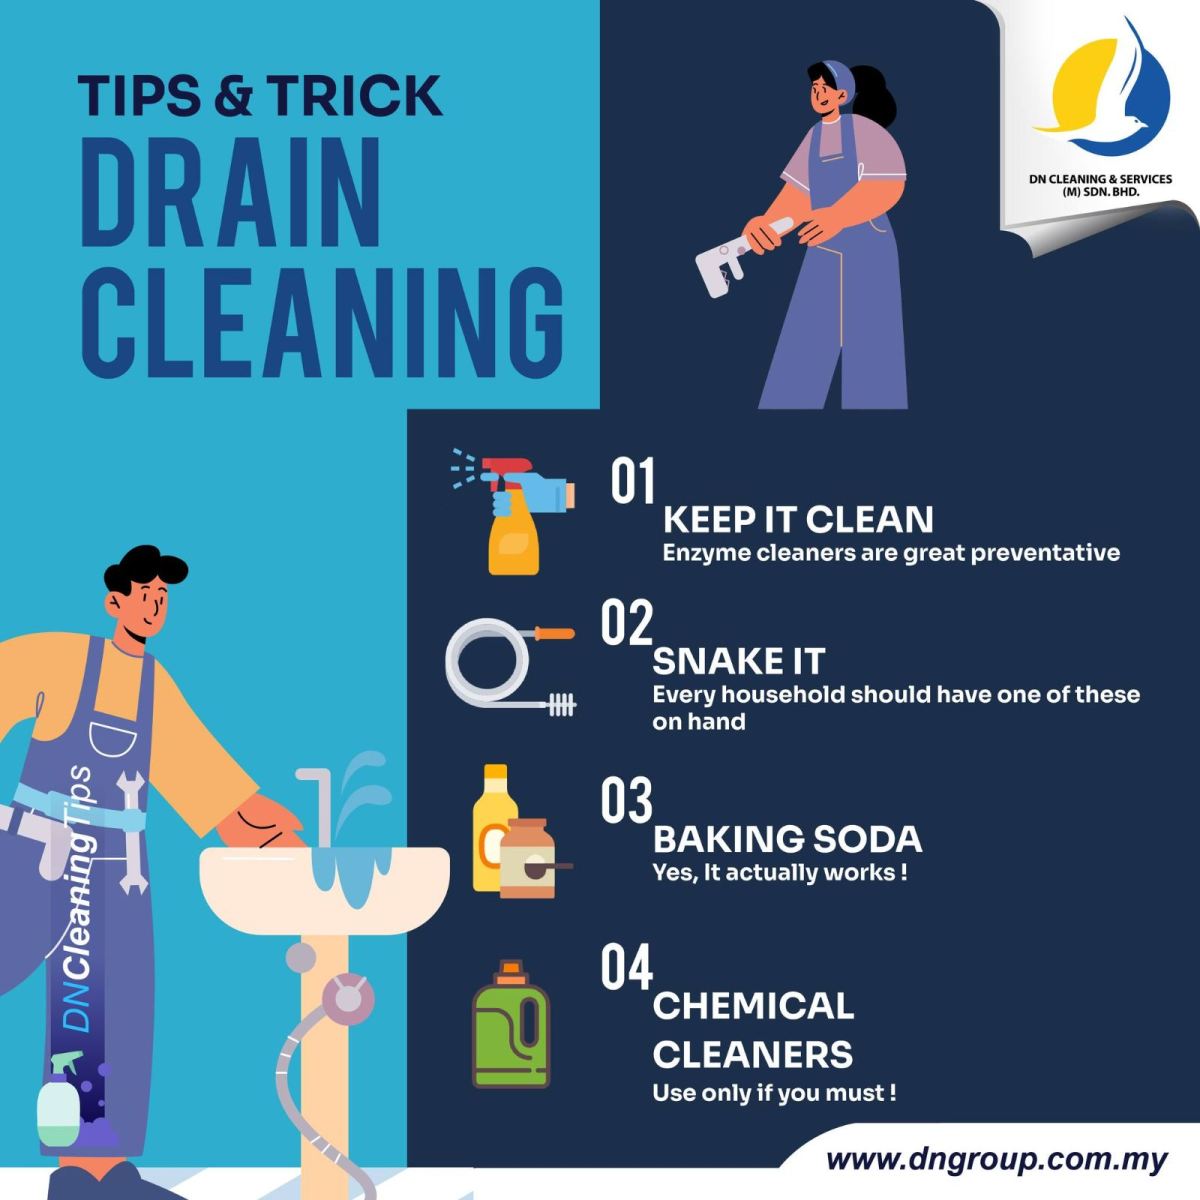 Tips & Trick Drain Cleaning